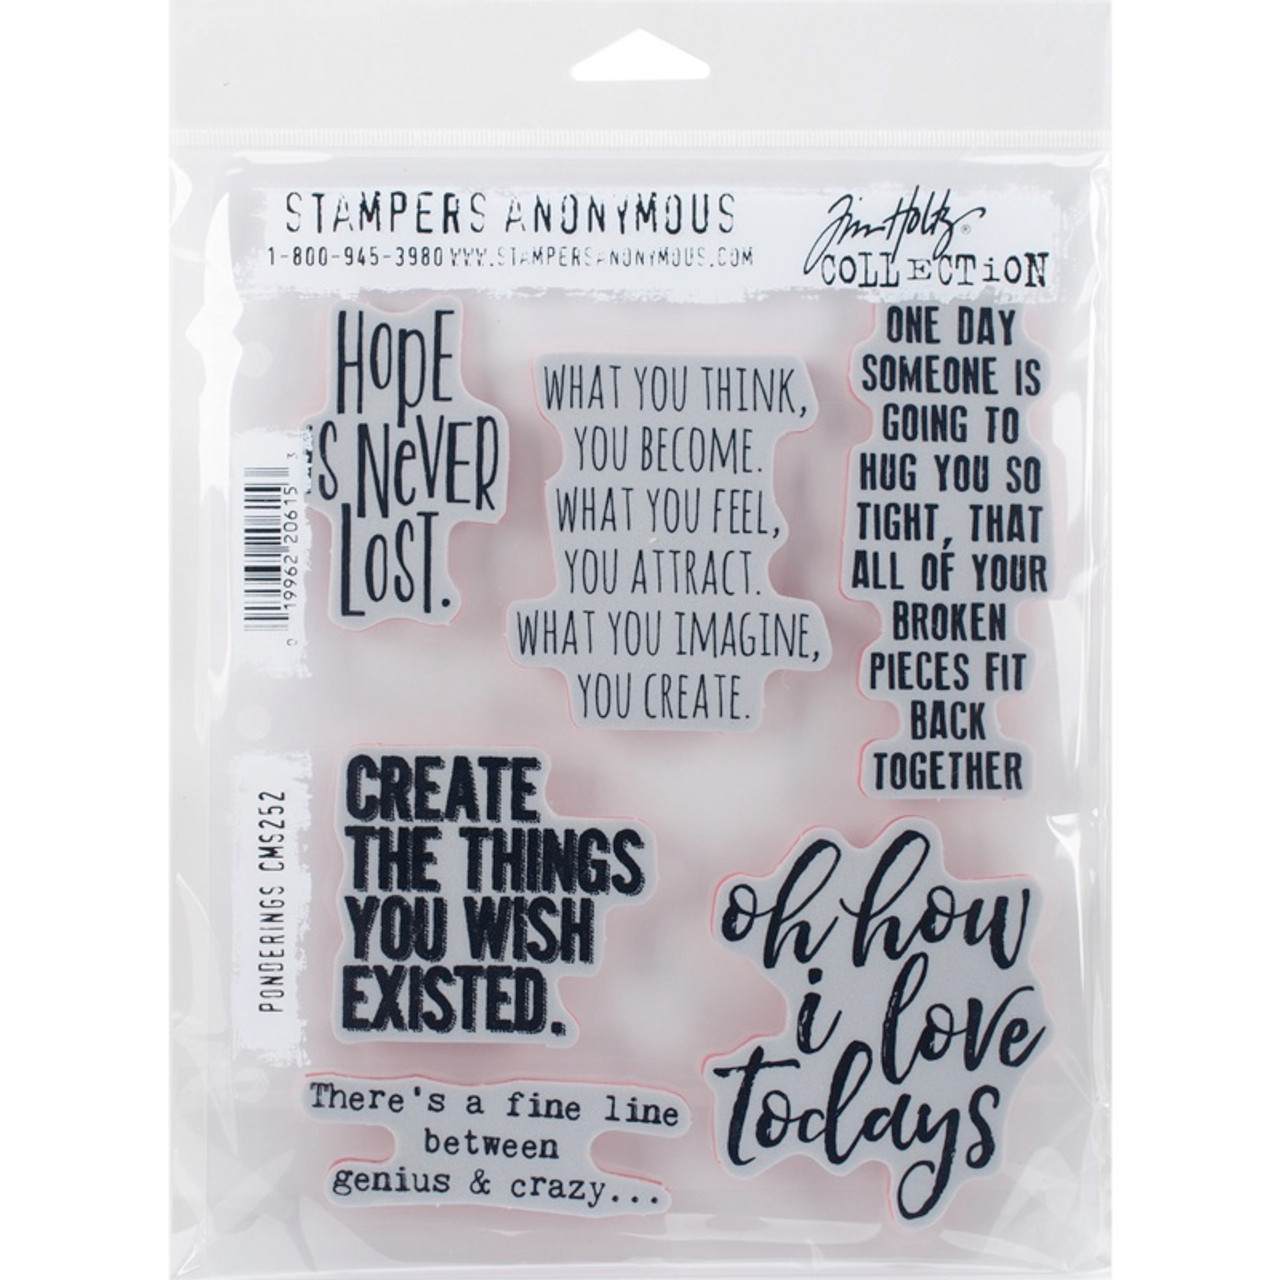 Tim Holtz - Cling Stamps / Department Store